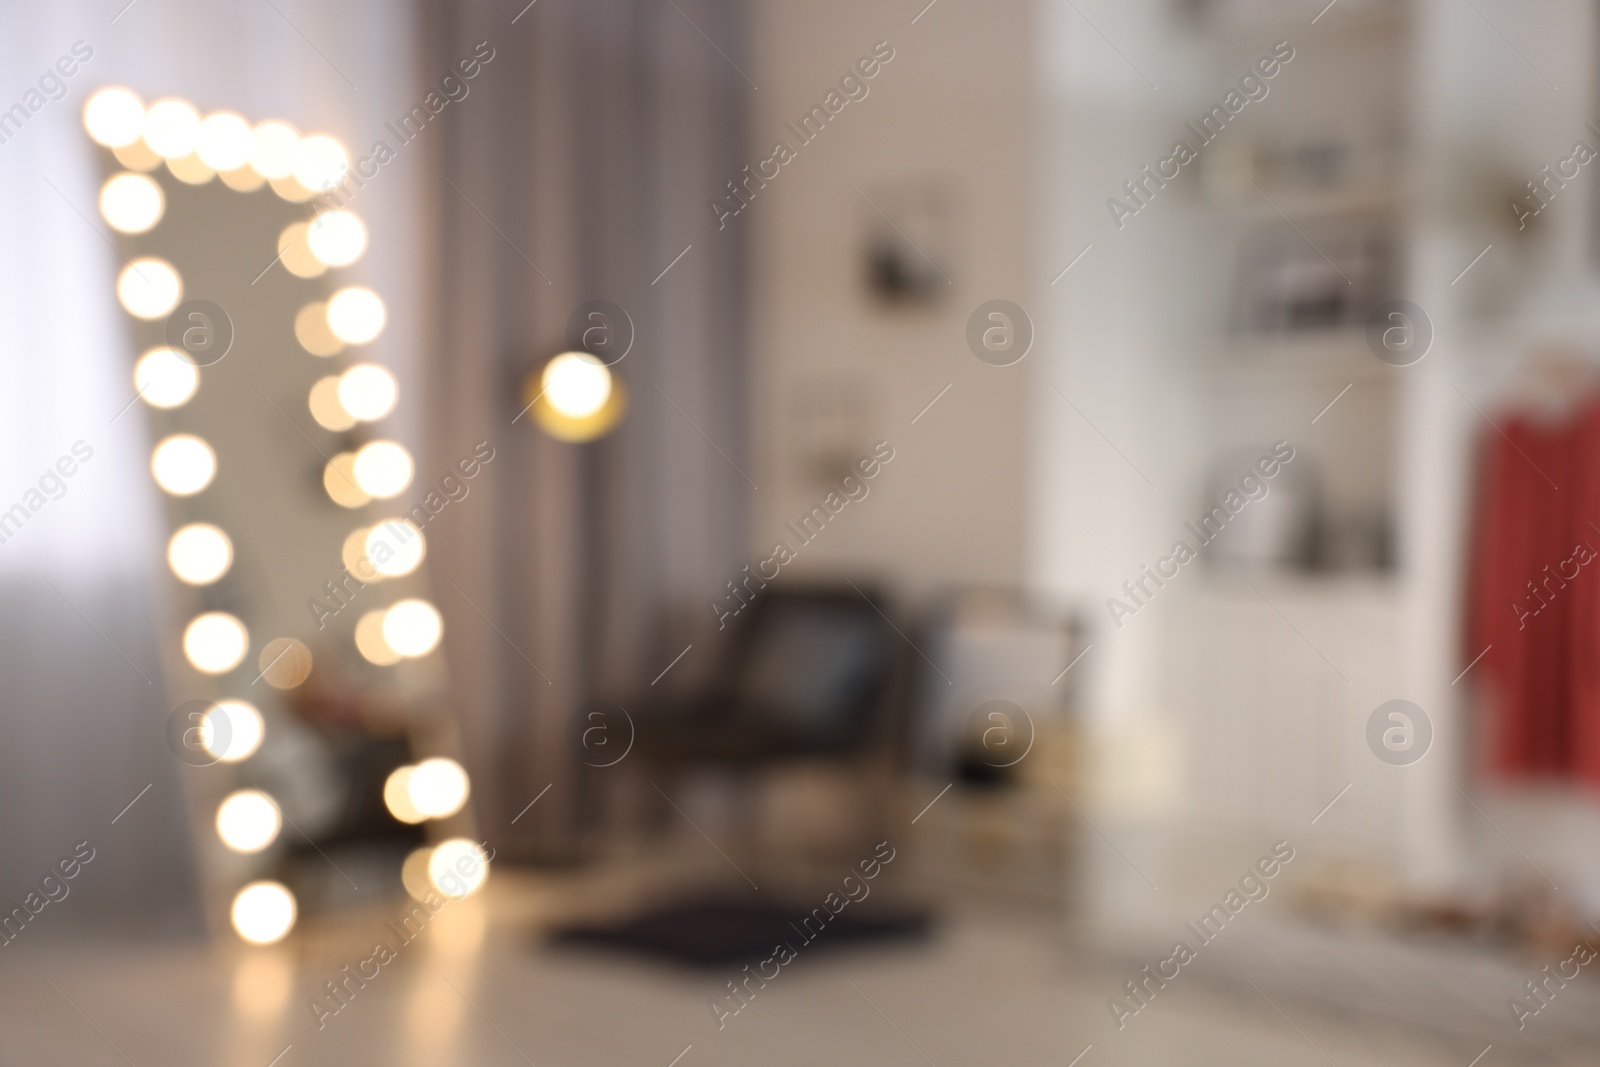 Photo of Blurred view of makeup room with stylish mirror